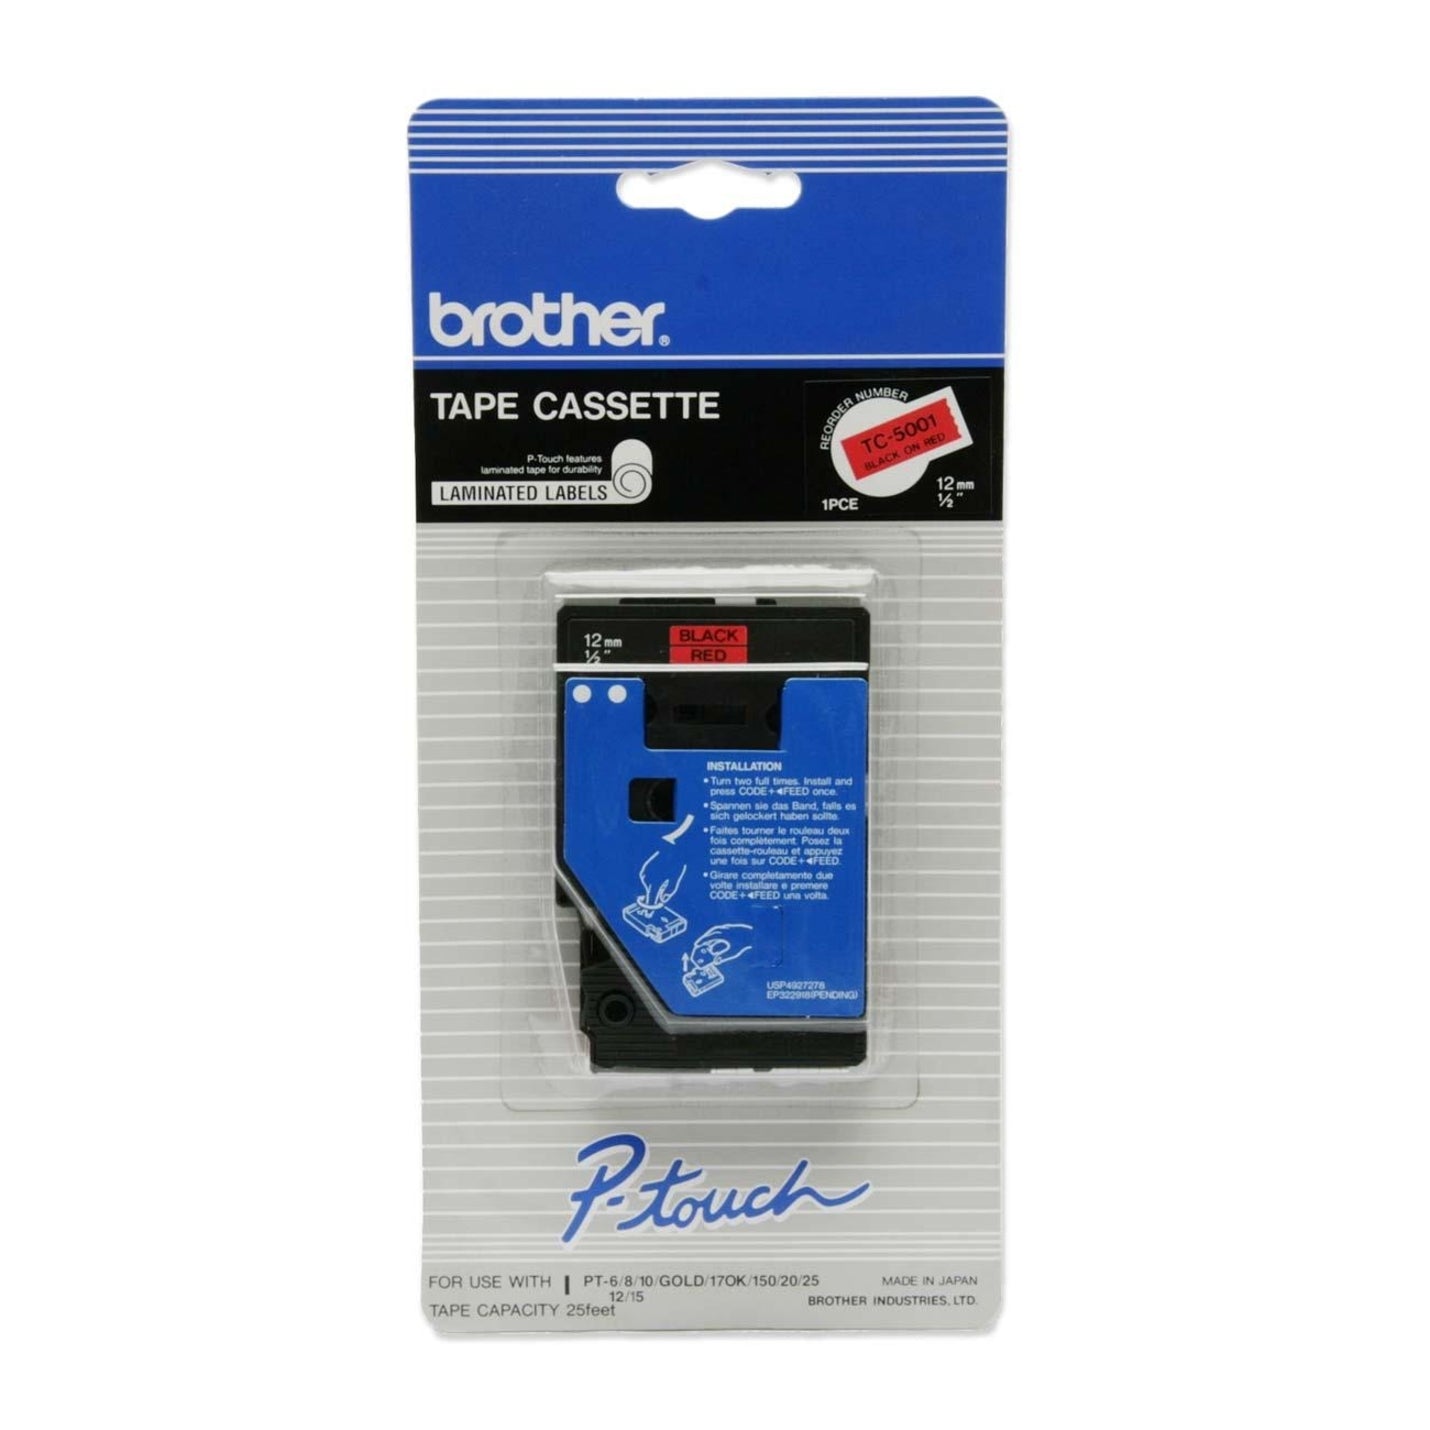 Brother TC5001 P-touch 12mm Laminated Tape, Black/Red